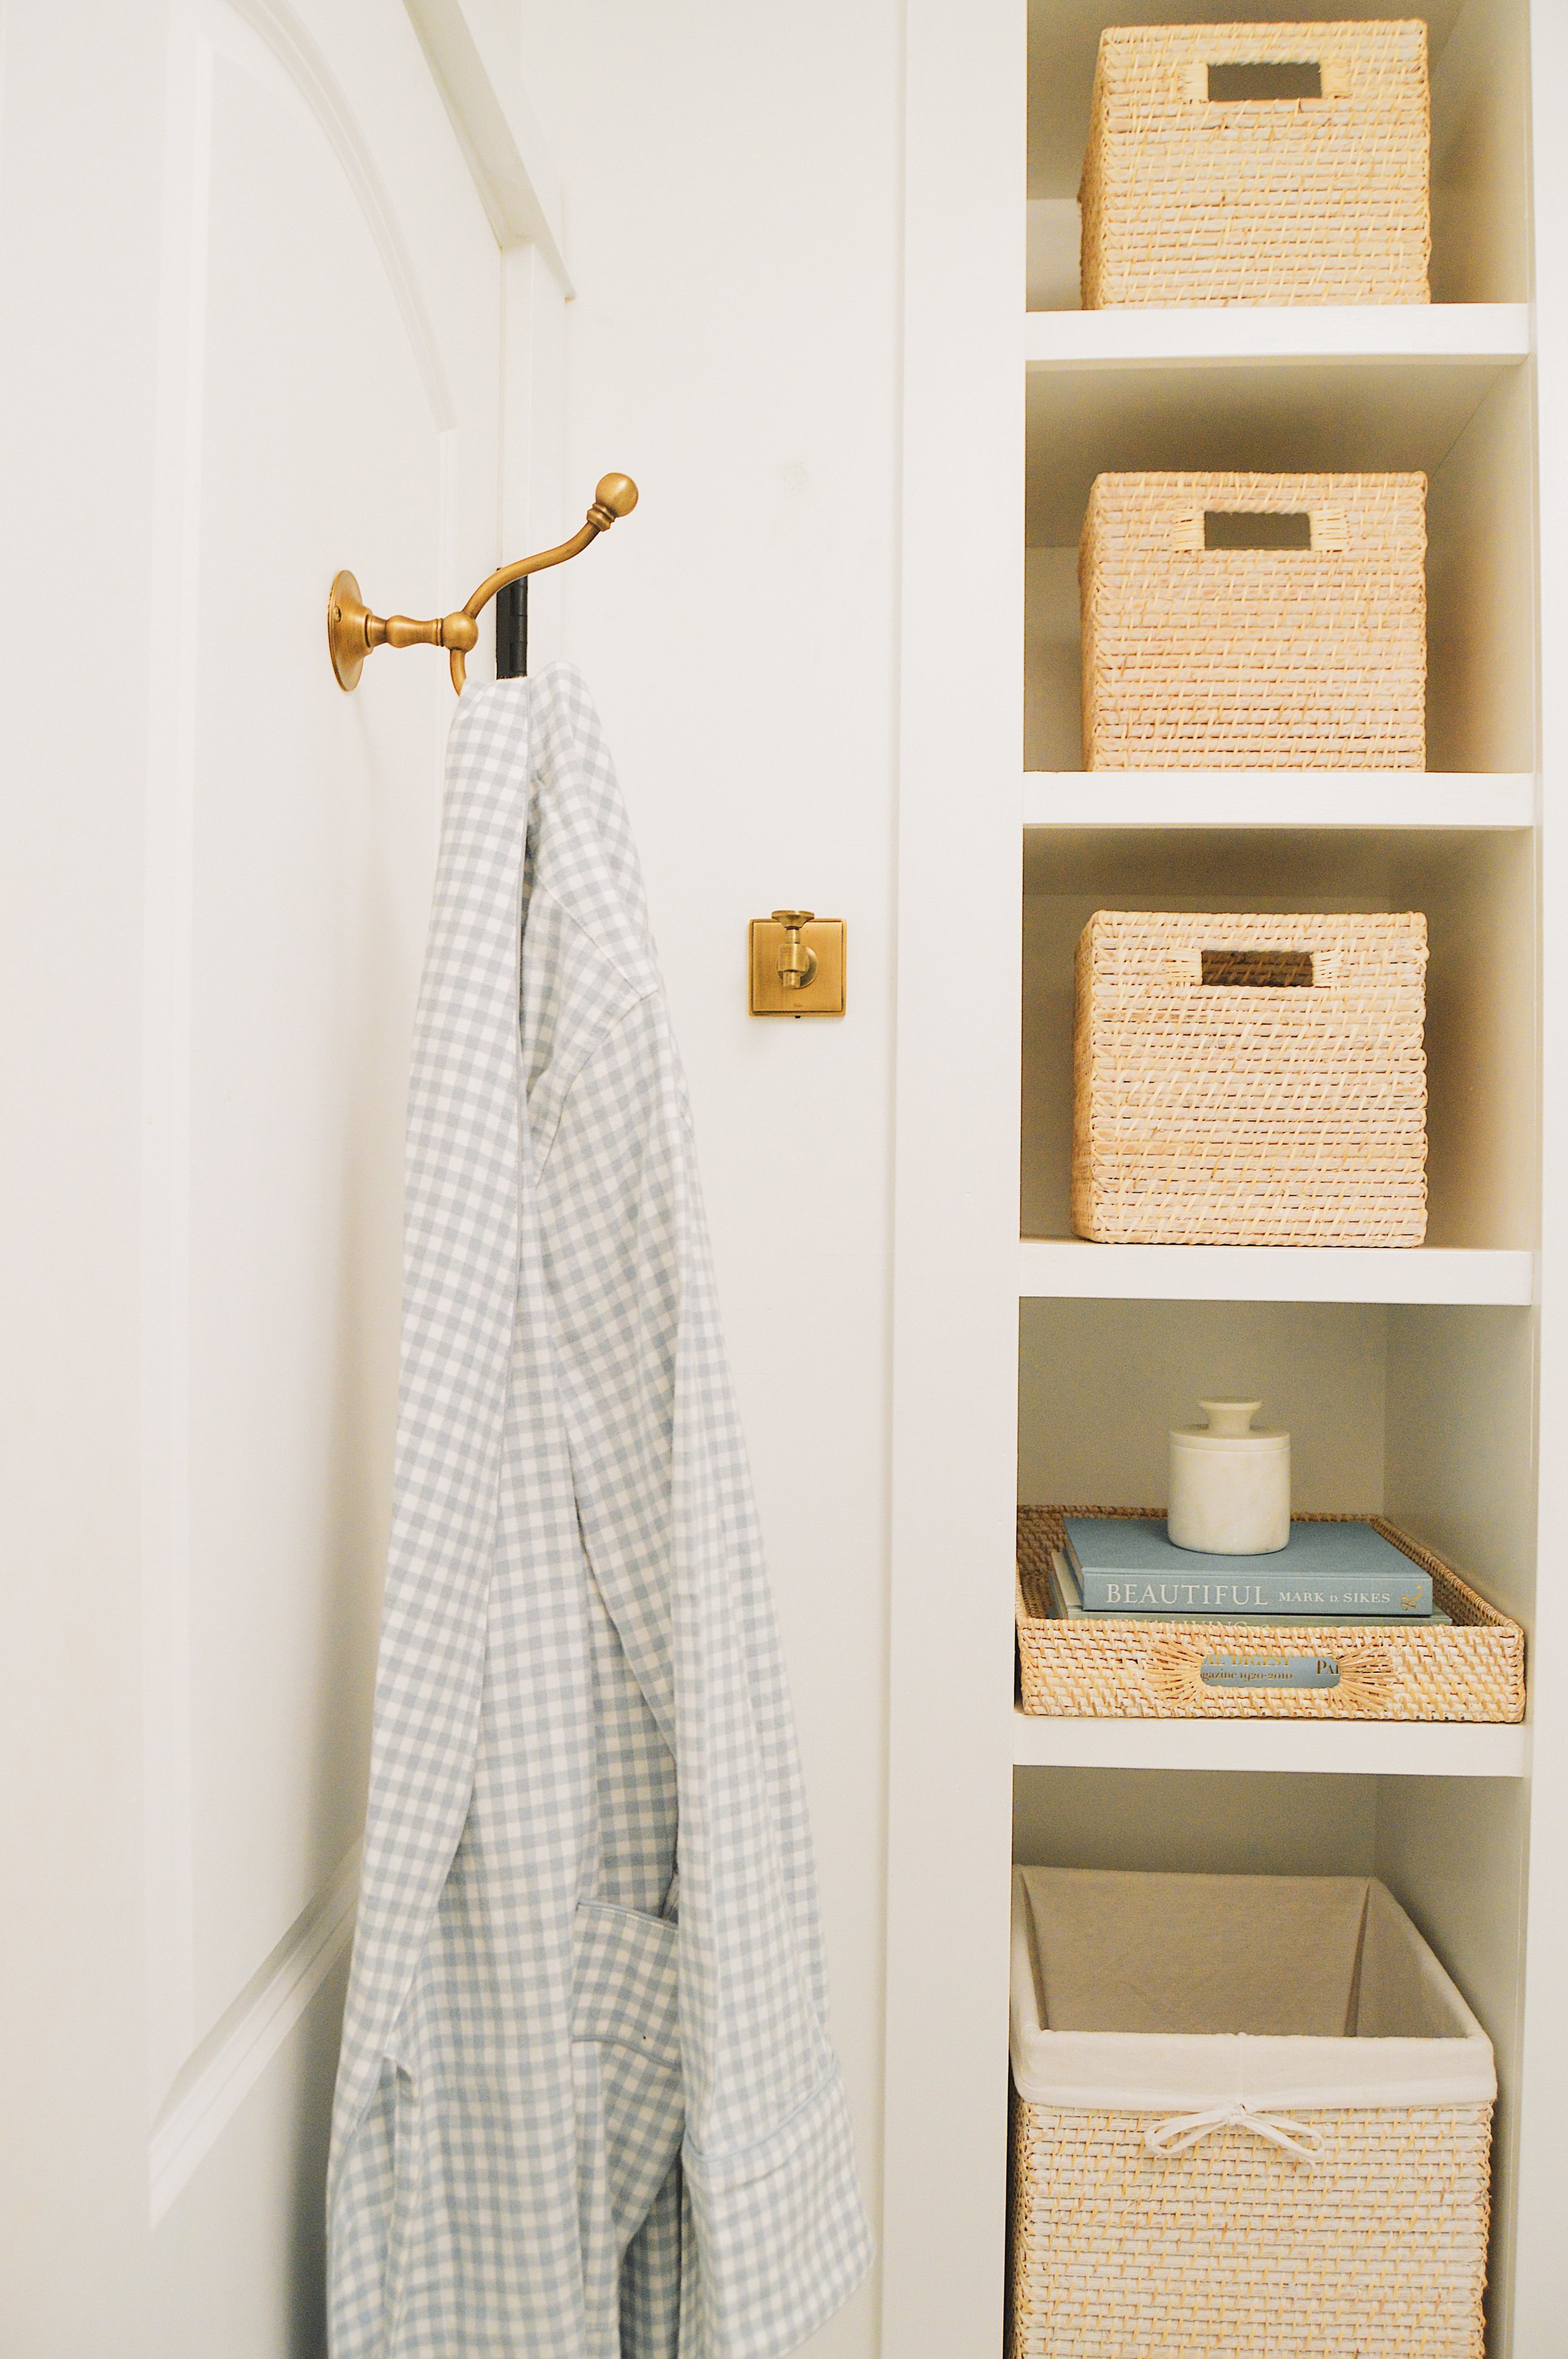  In our bathroom, I used these rattan handled bins to store my most-used beauty products.  